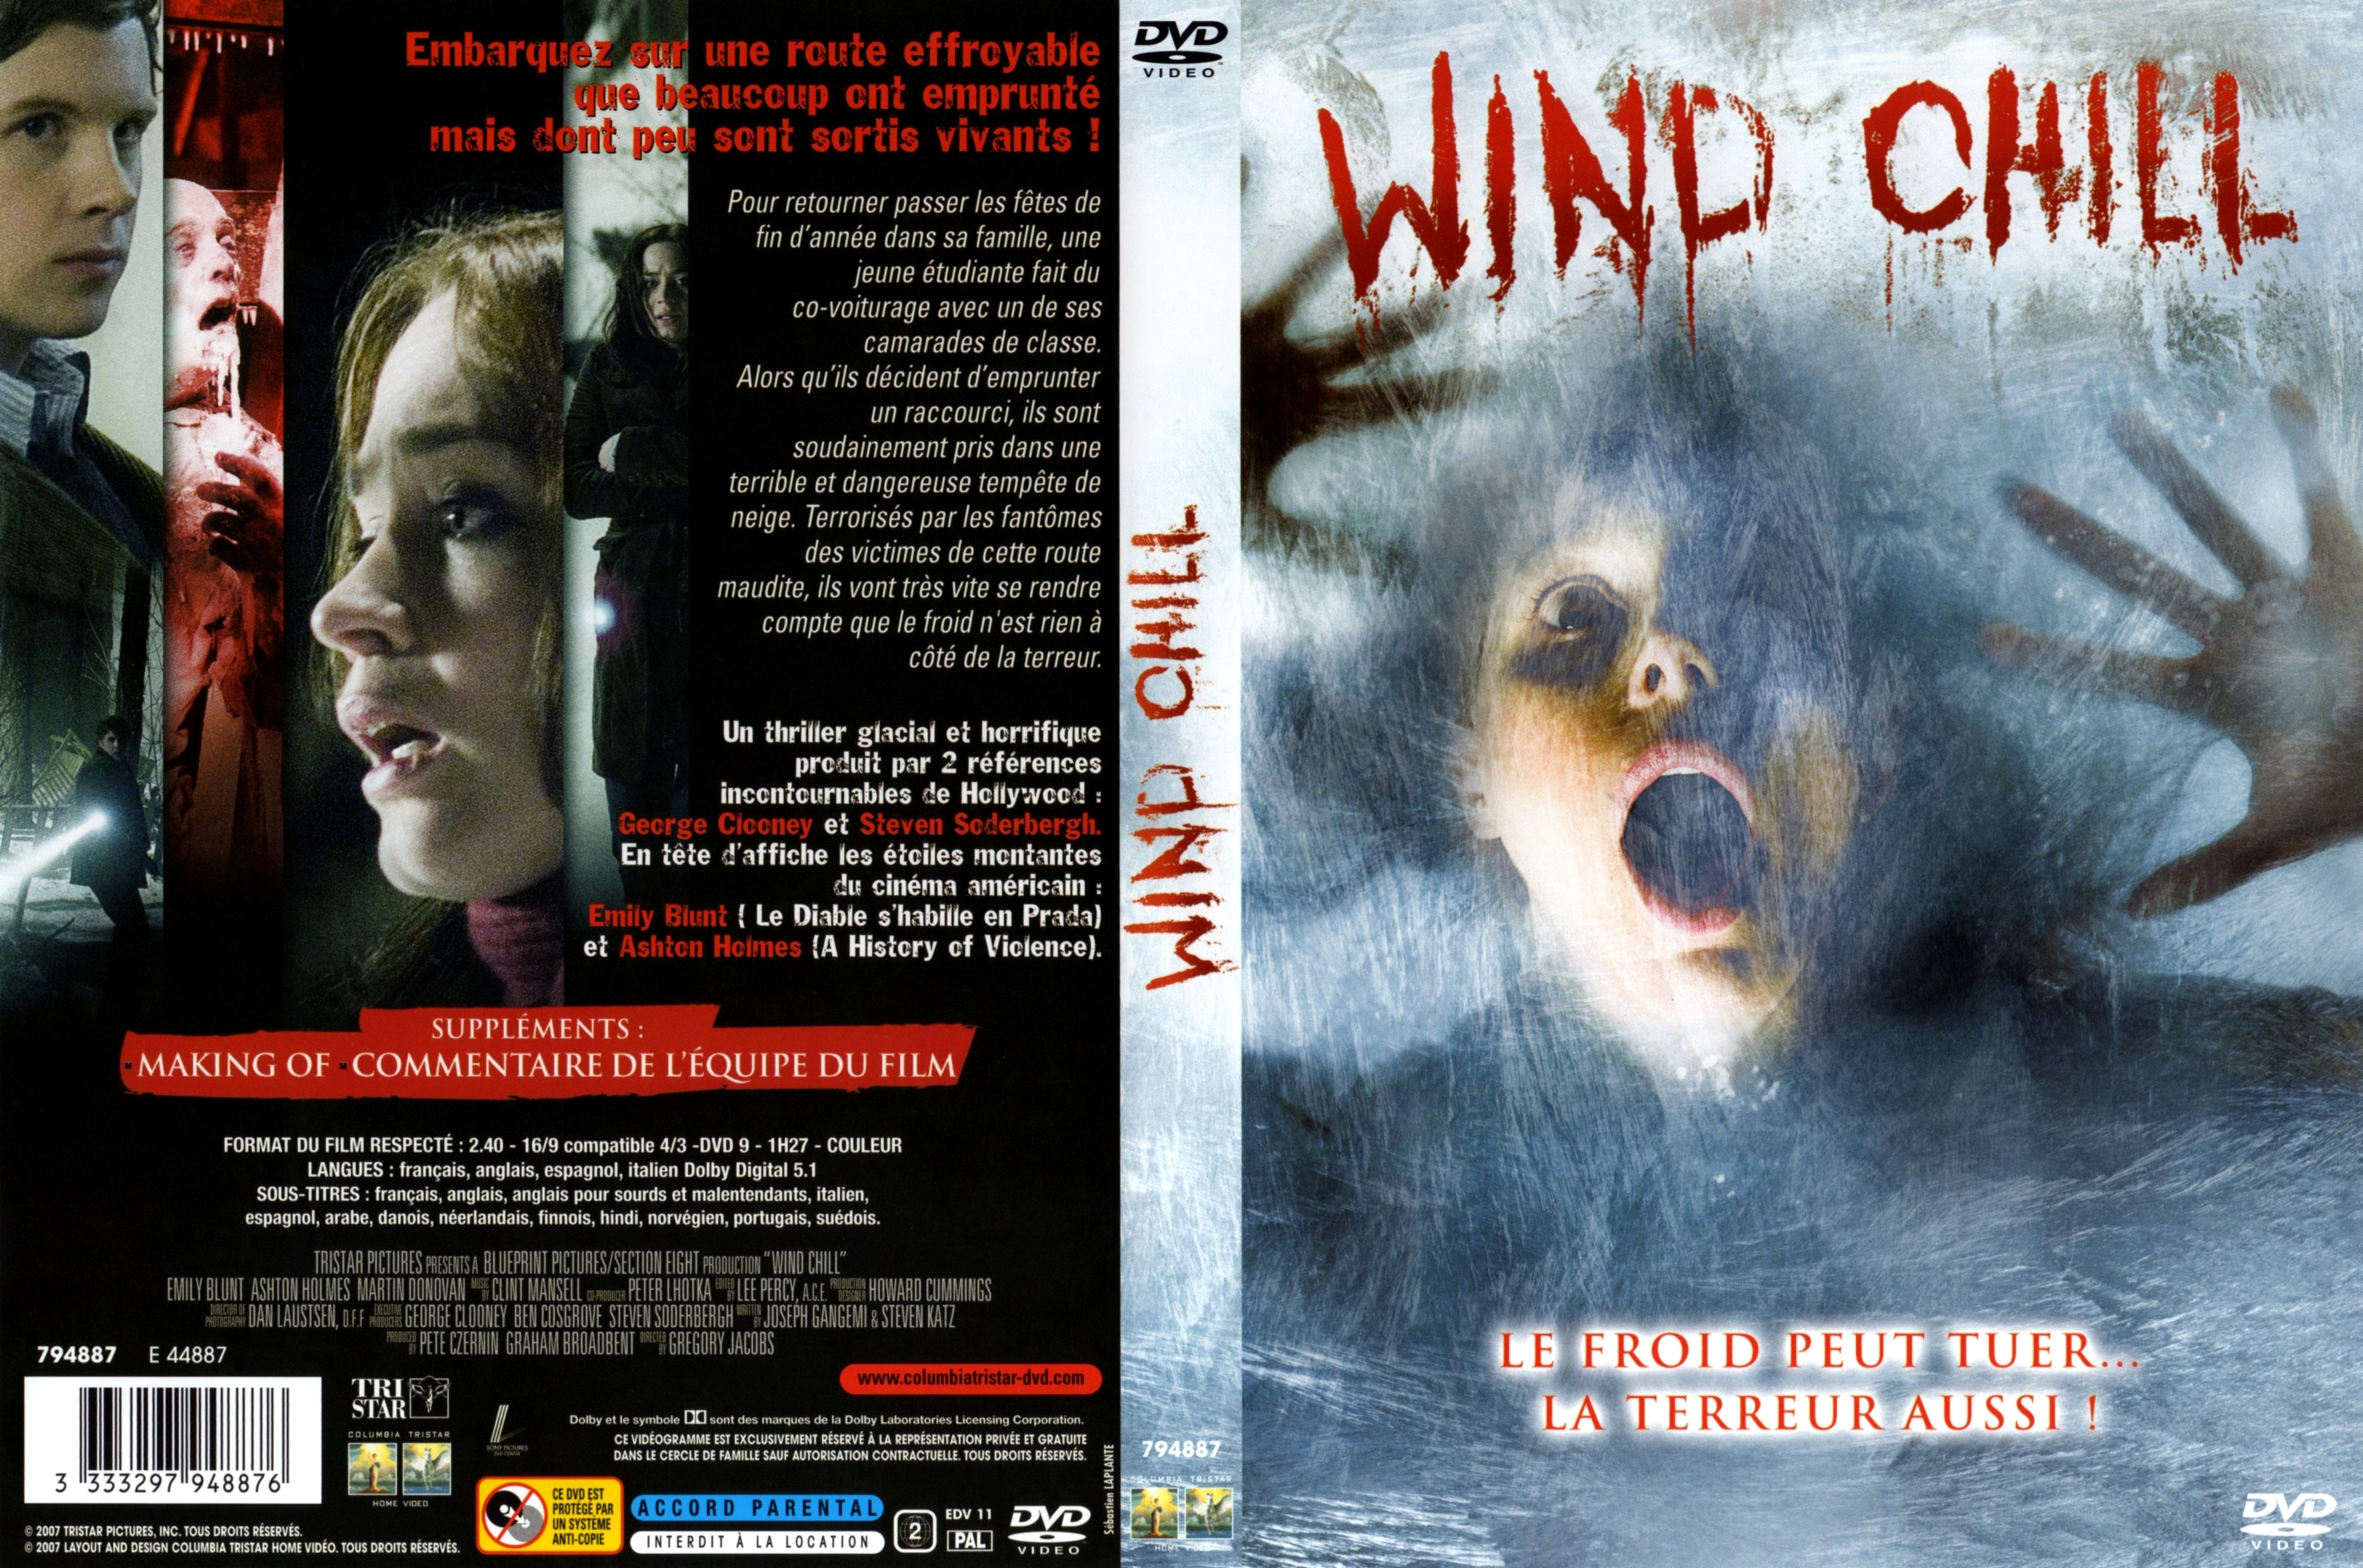 Jaquette DVD Wind chill